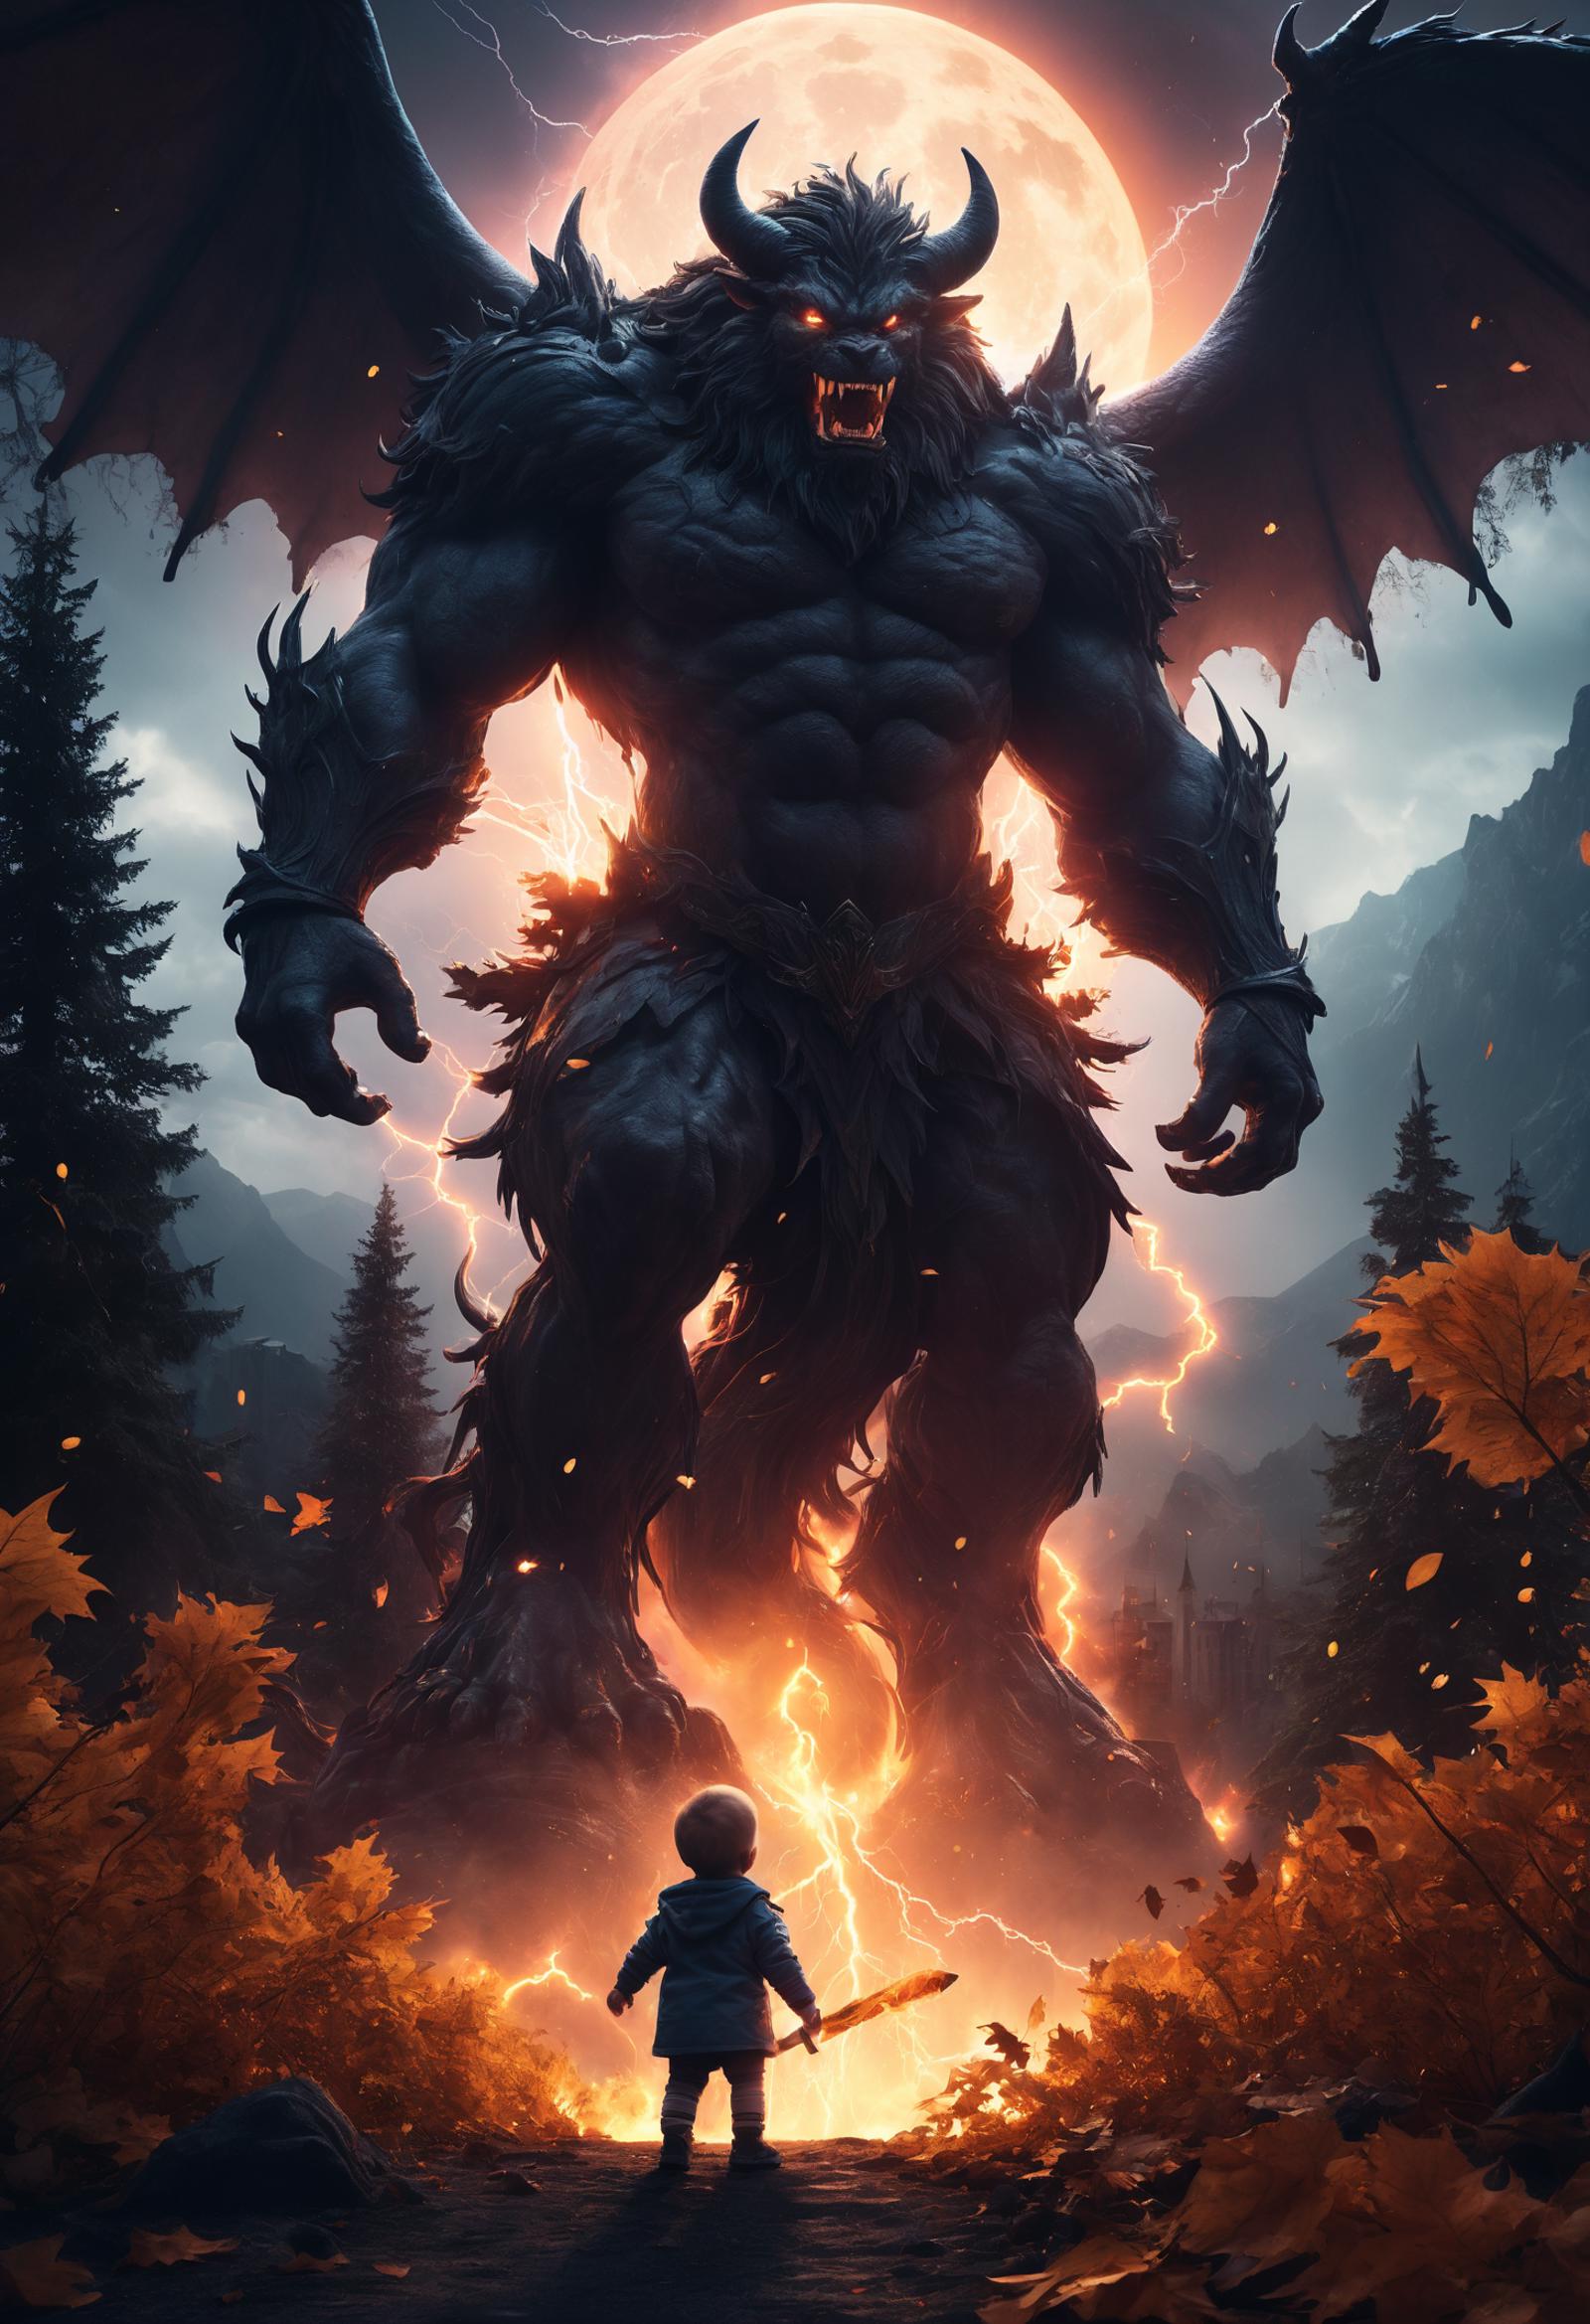 A giant demonic monster in the woods with a small person standing in front of it.